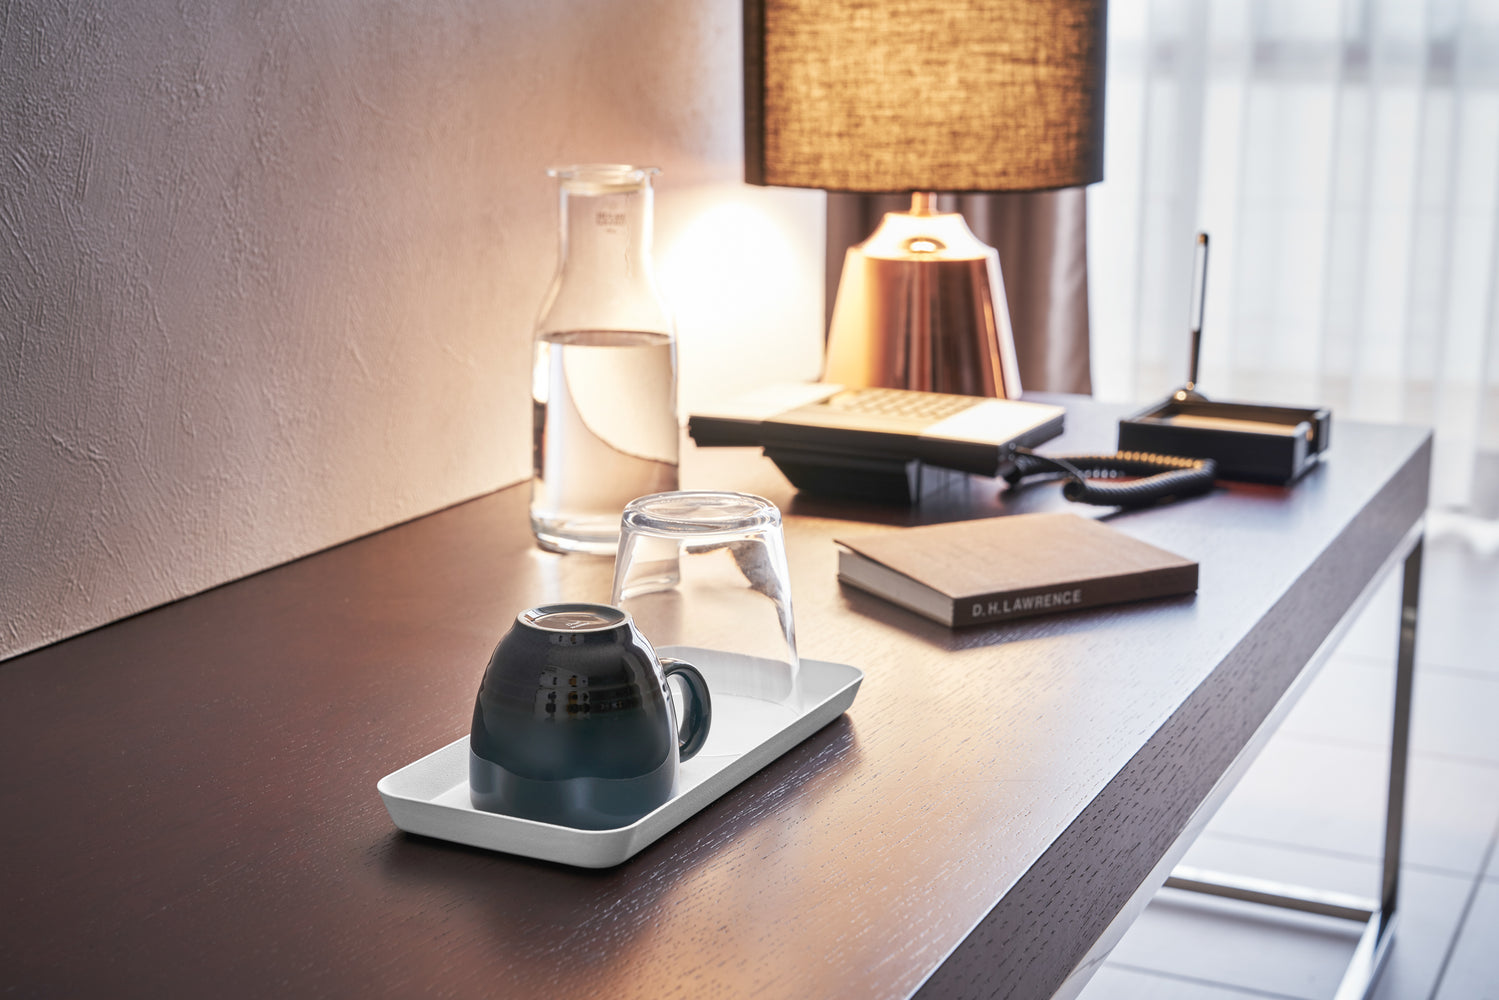 View 16 - White Accessory Tray holding mug and glass on desk by Yamazaki Home.